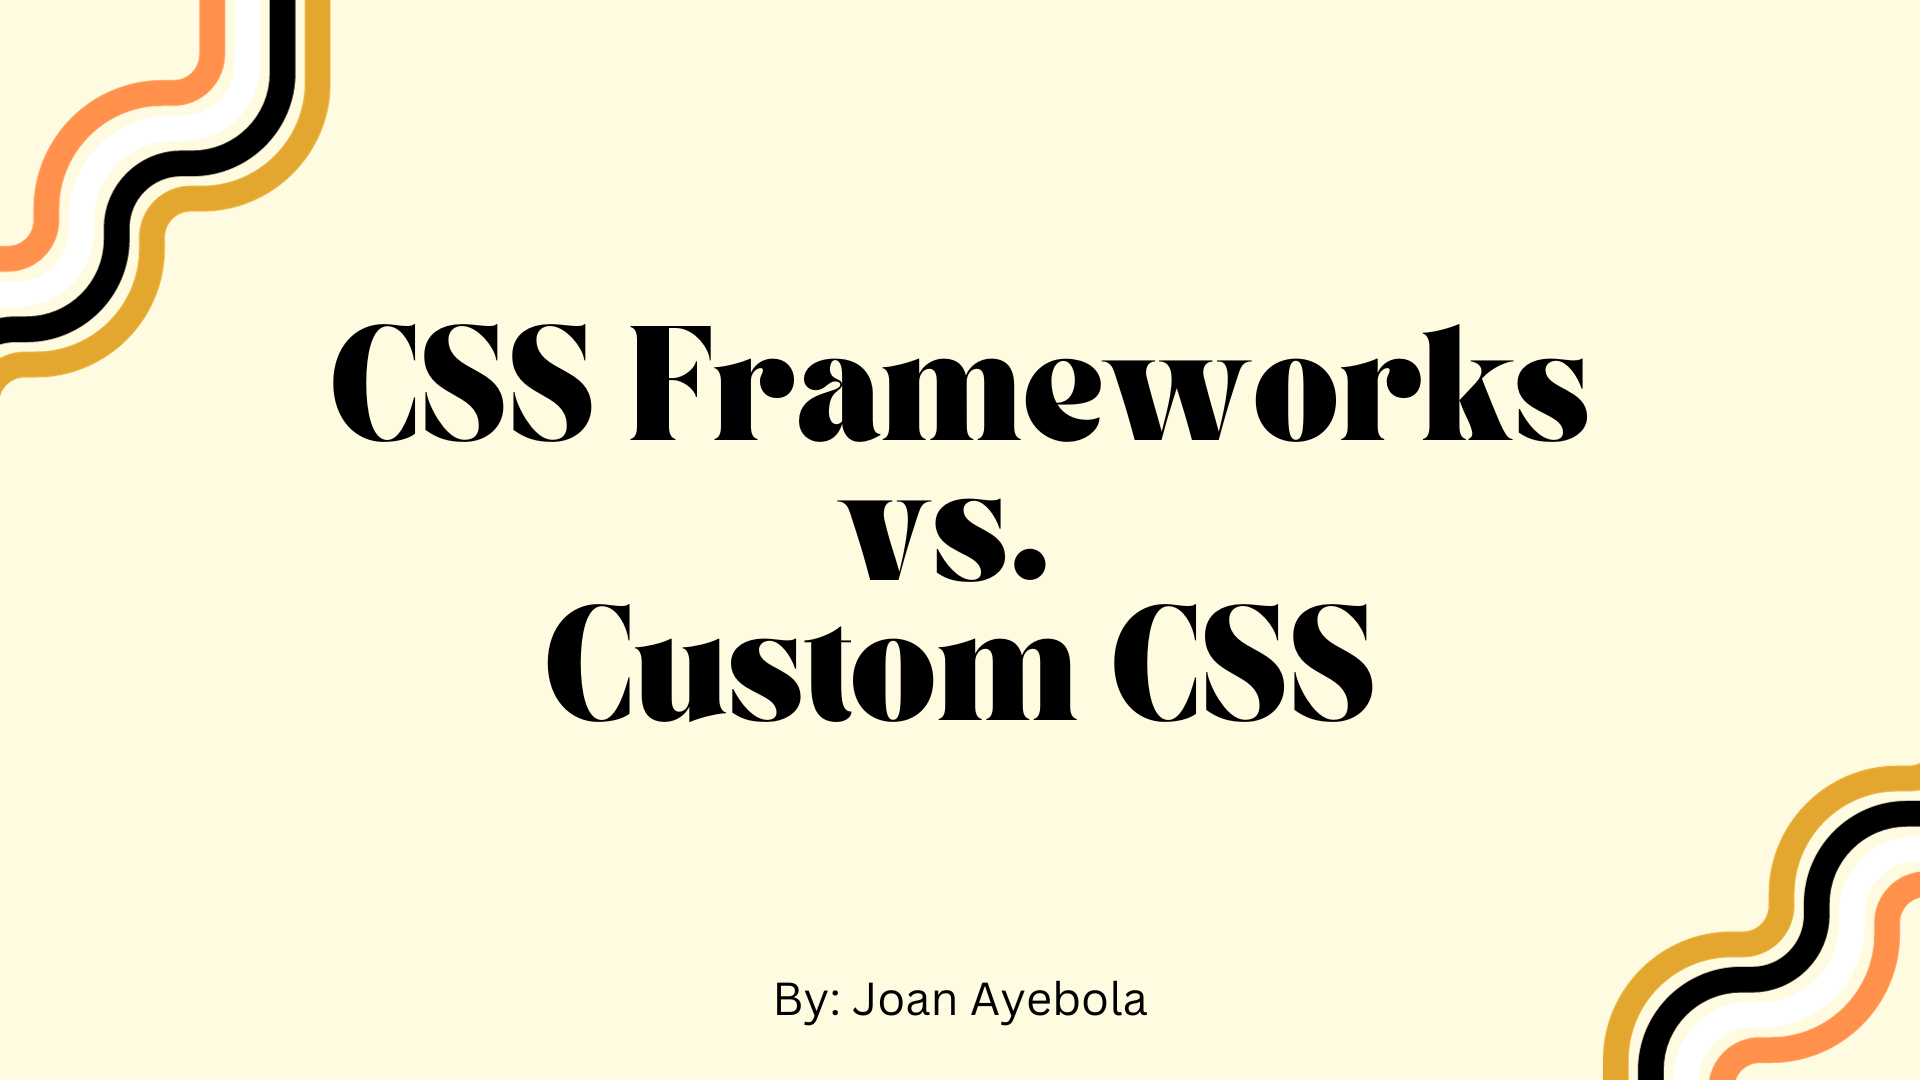 CSS Frameworks vs Custom CSS – What’s the Difference?